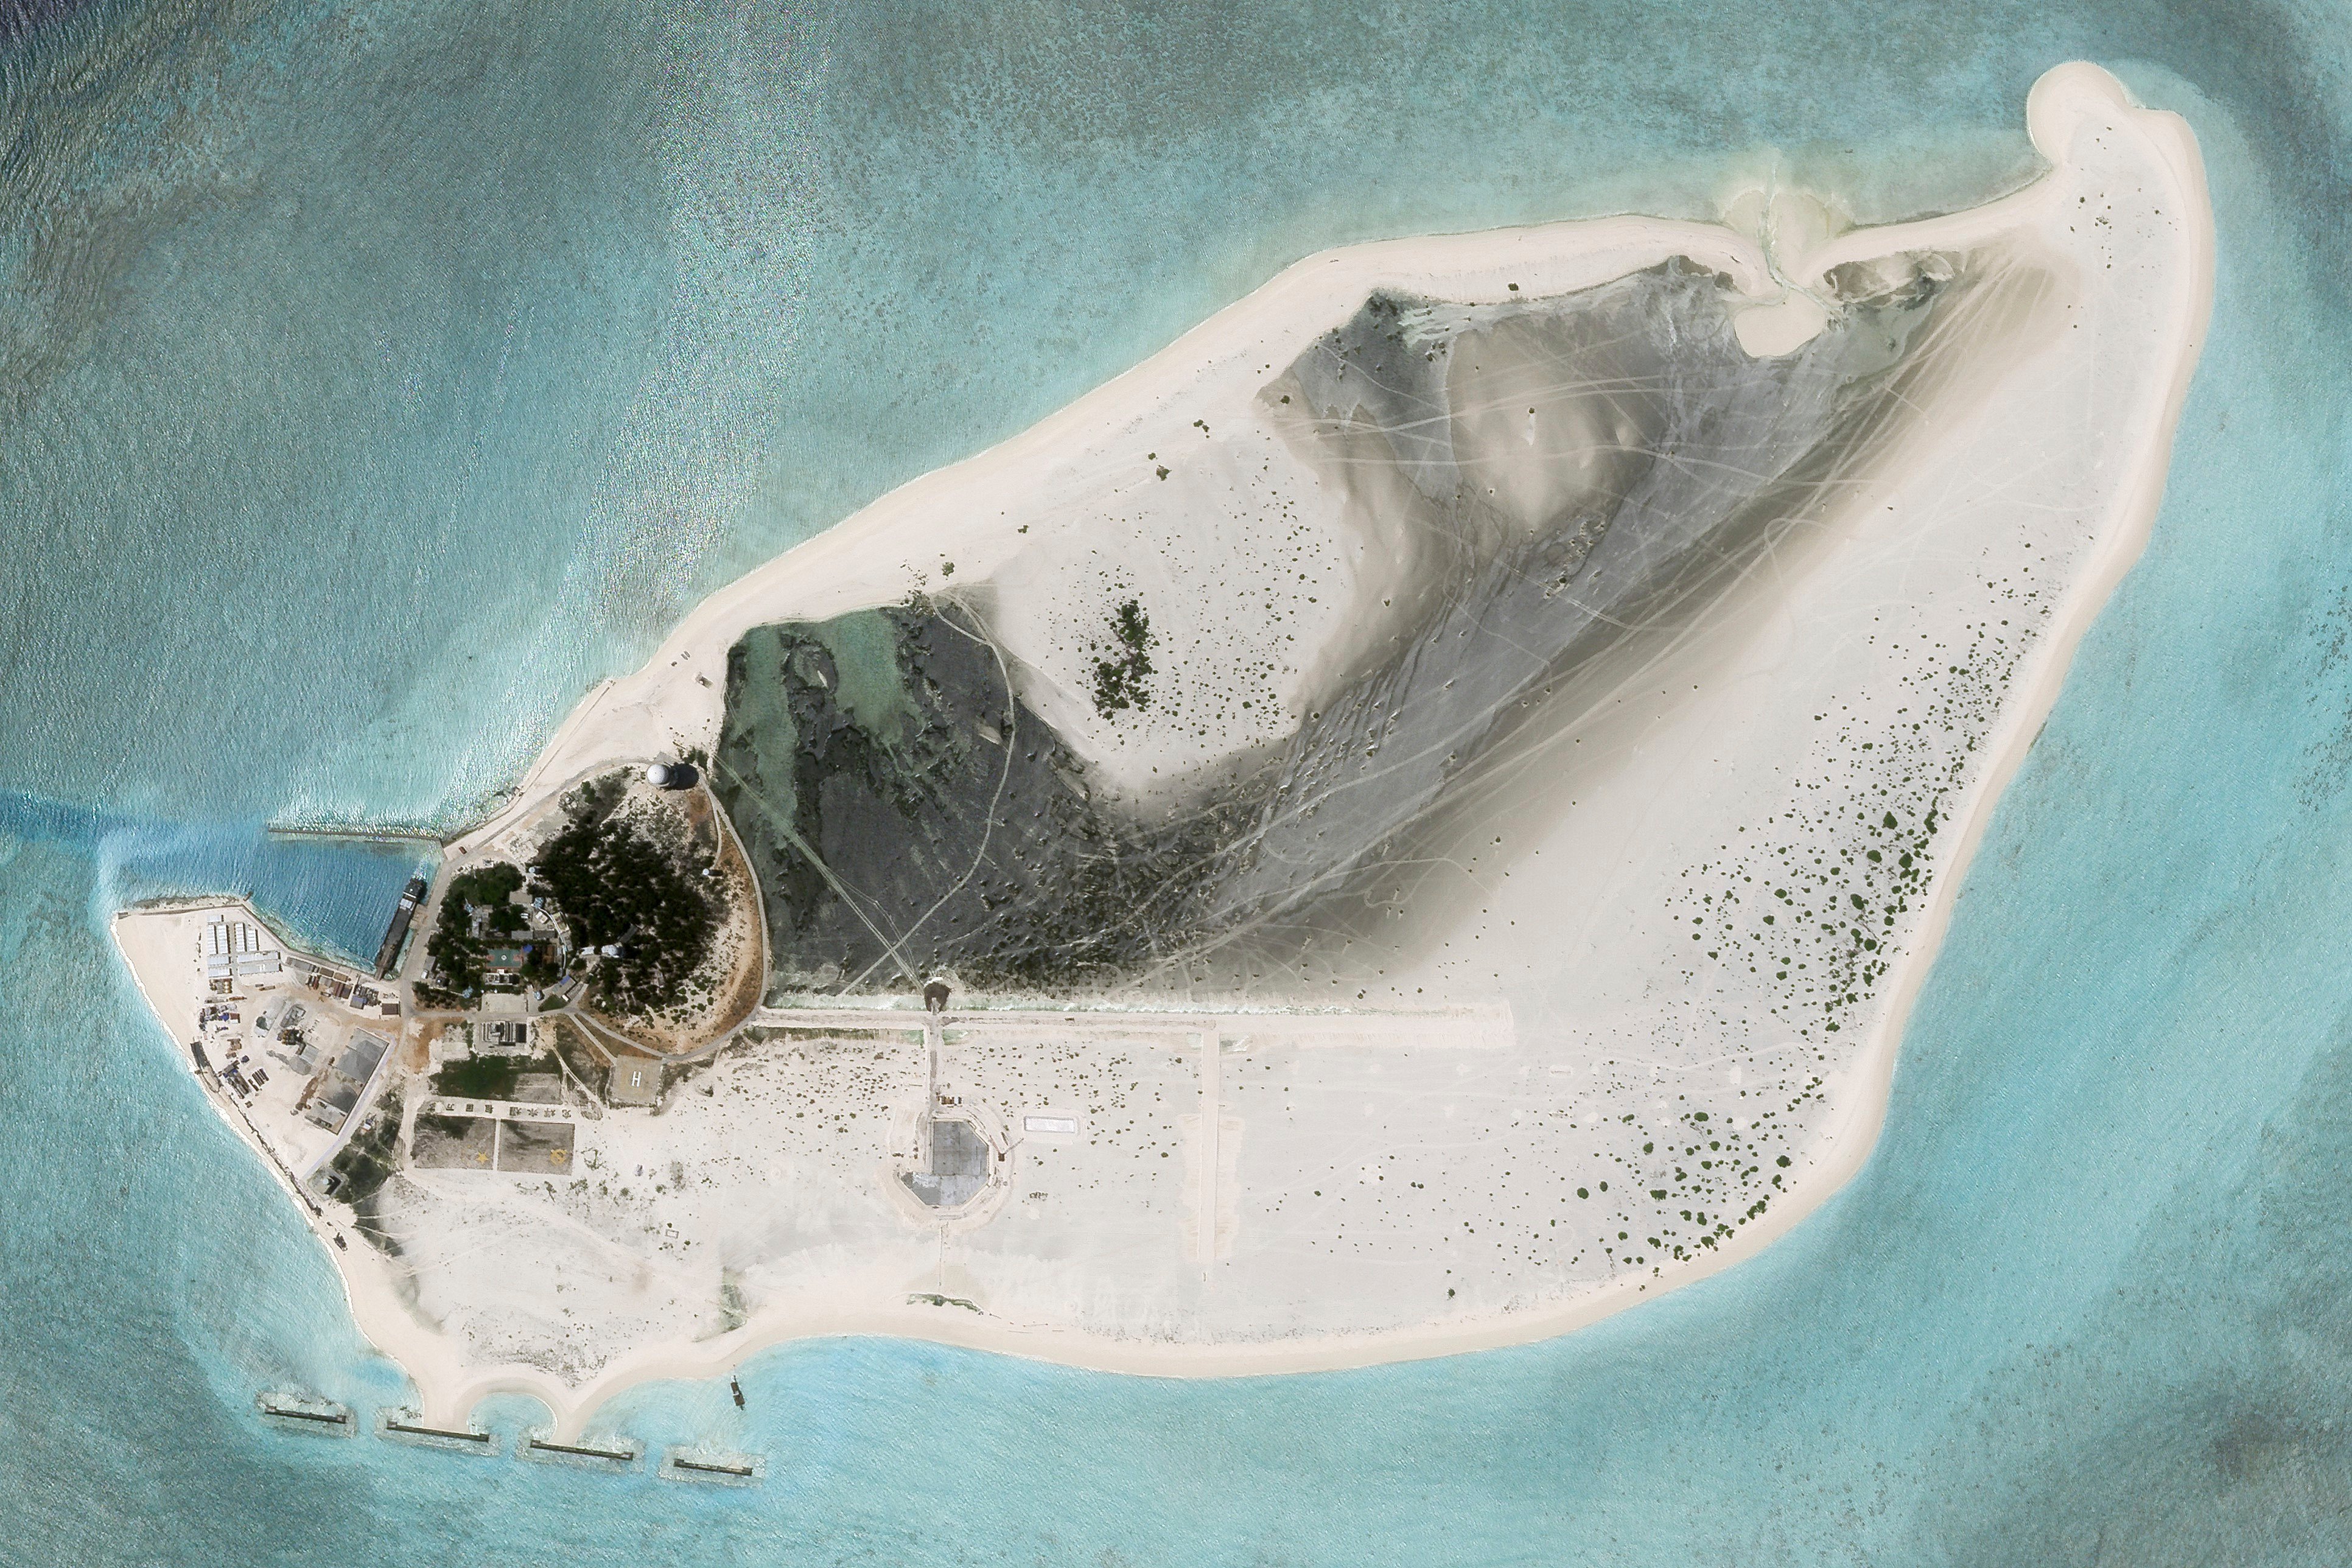 In addition to the airstrip, China appears to be constructing a new building on Triton Island, according to satellite images. Photo: Planet Labs PBC via AP